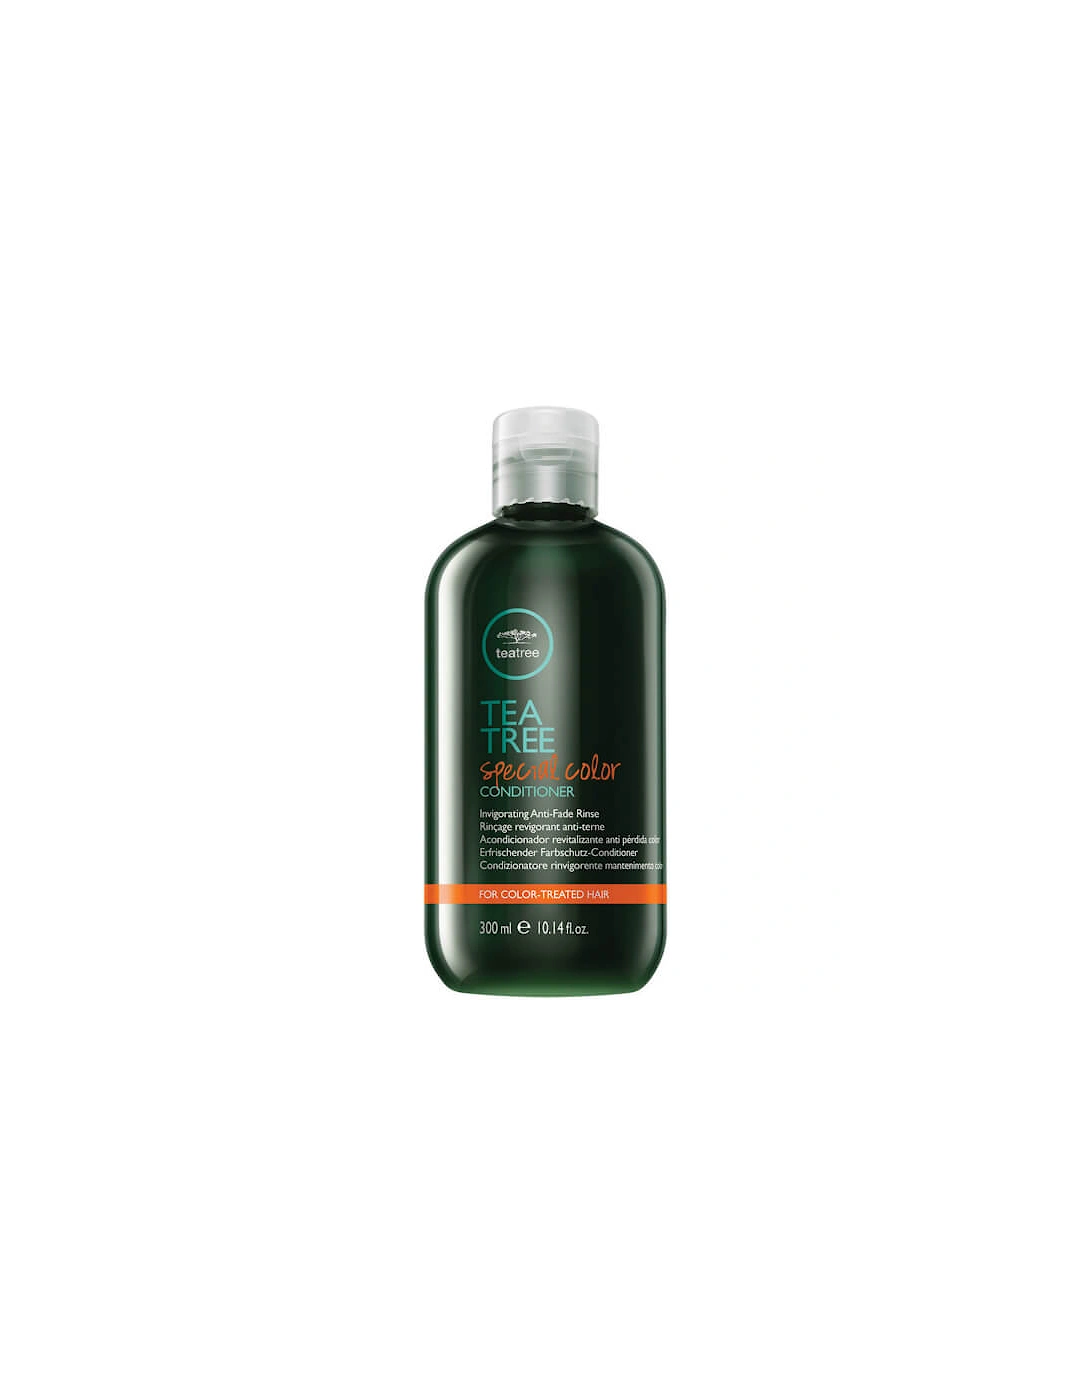 Tea Tree Special Color Conditioner 300ml - Paul Mitchell, 2 of 1